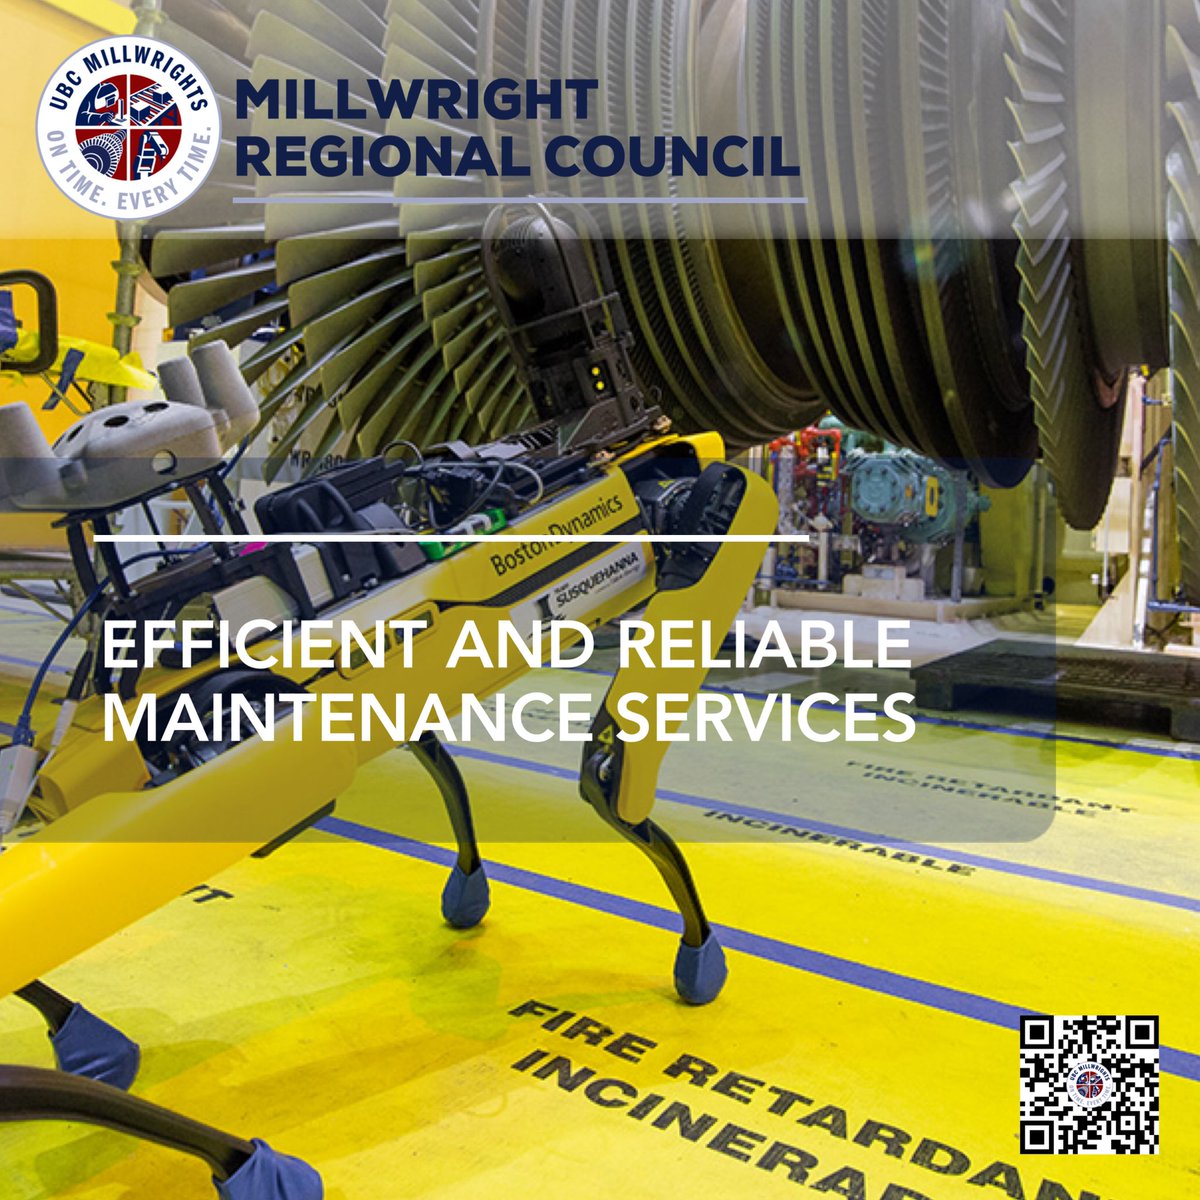 #UBCMillwrights provide project management millwrights, installation, maintenance, construction and repair services for daily maintenance requirements, turnarounds and capital projects.

ubcmillwrights.ca 

#millwrights #ubcbuilt